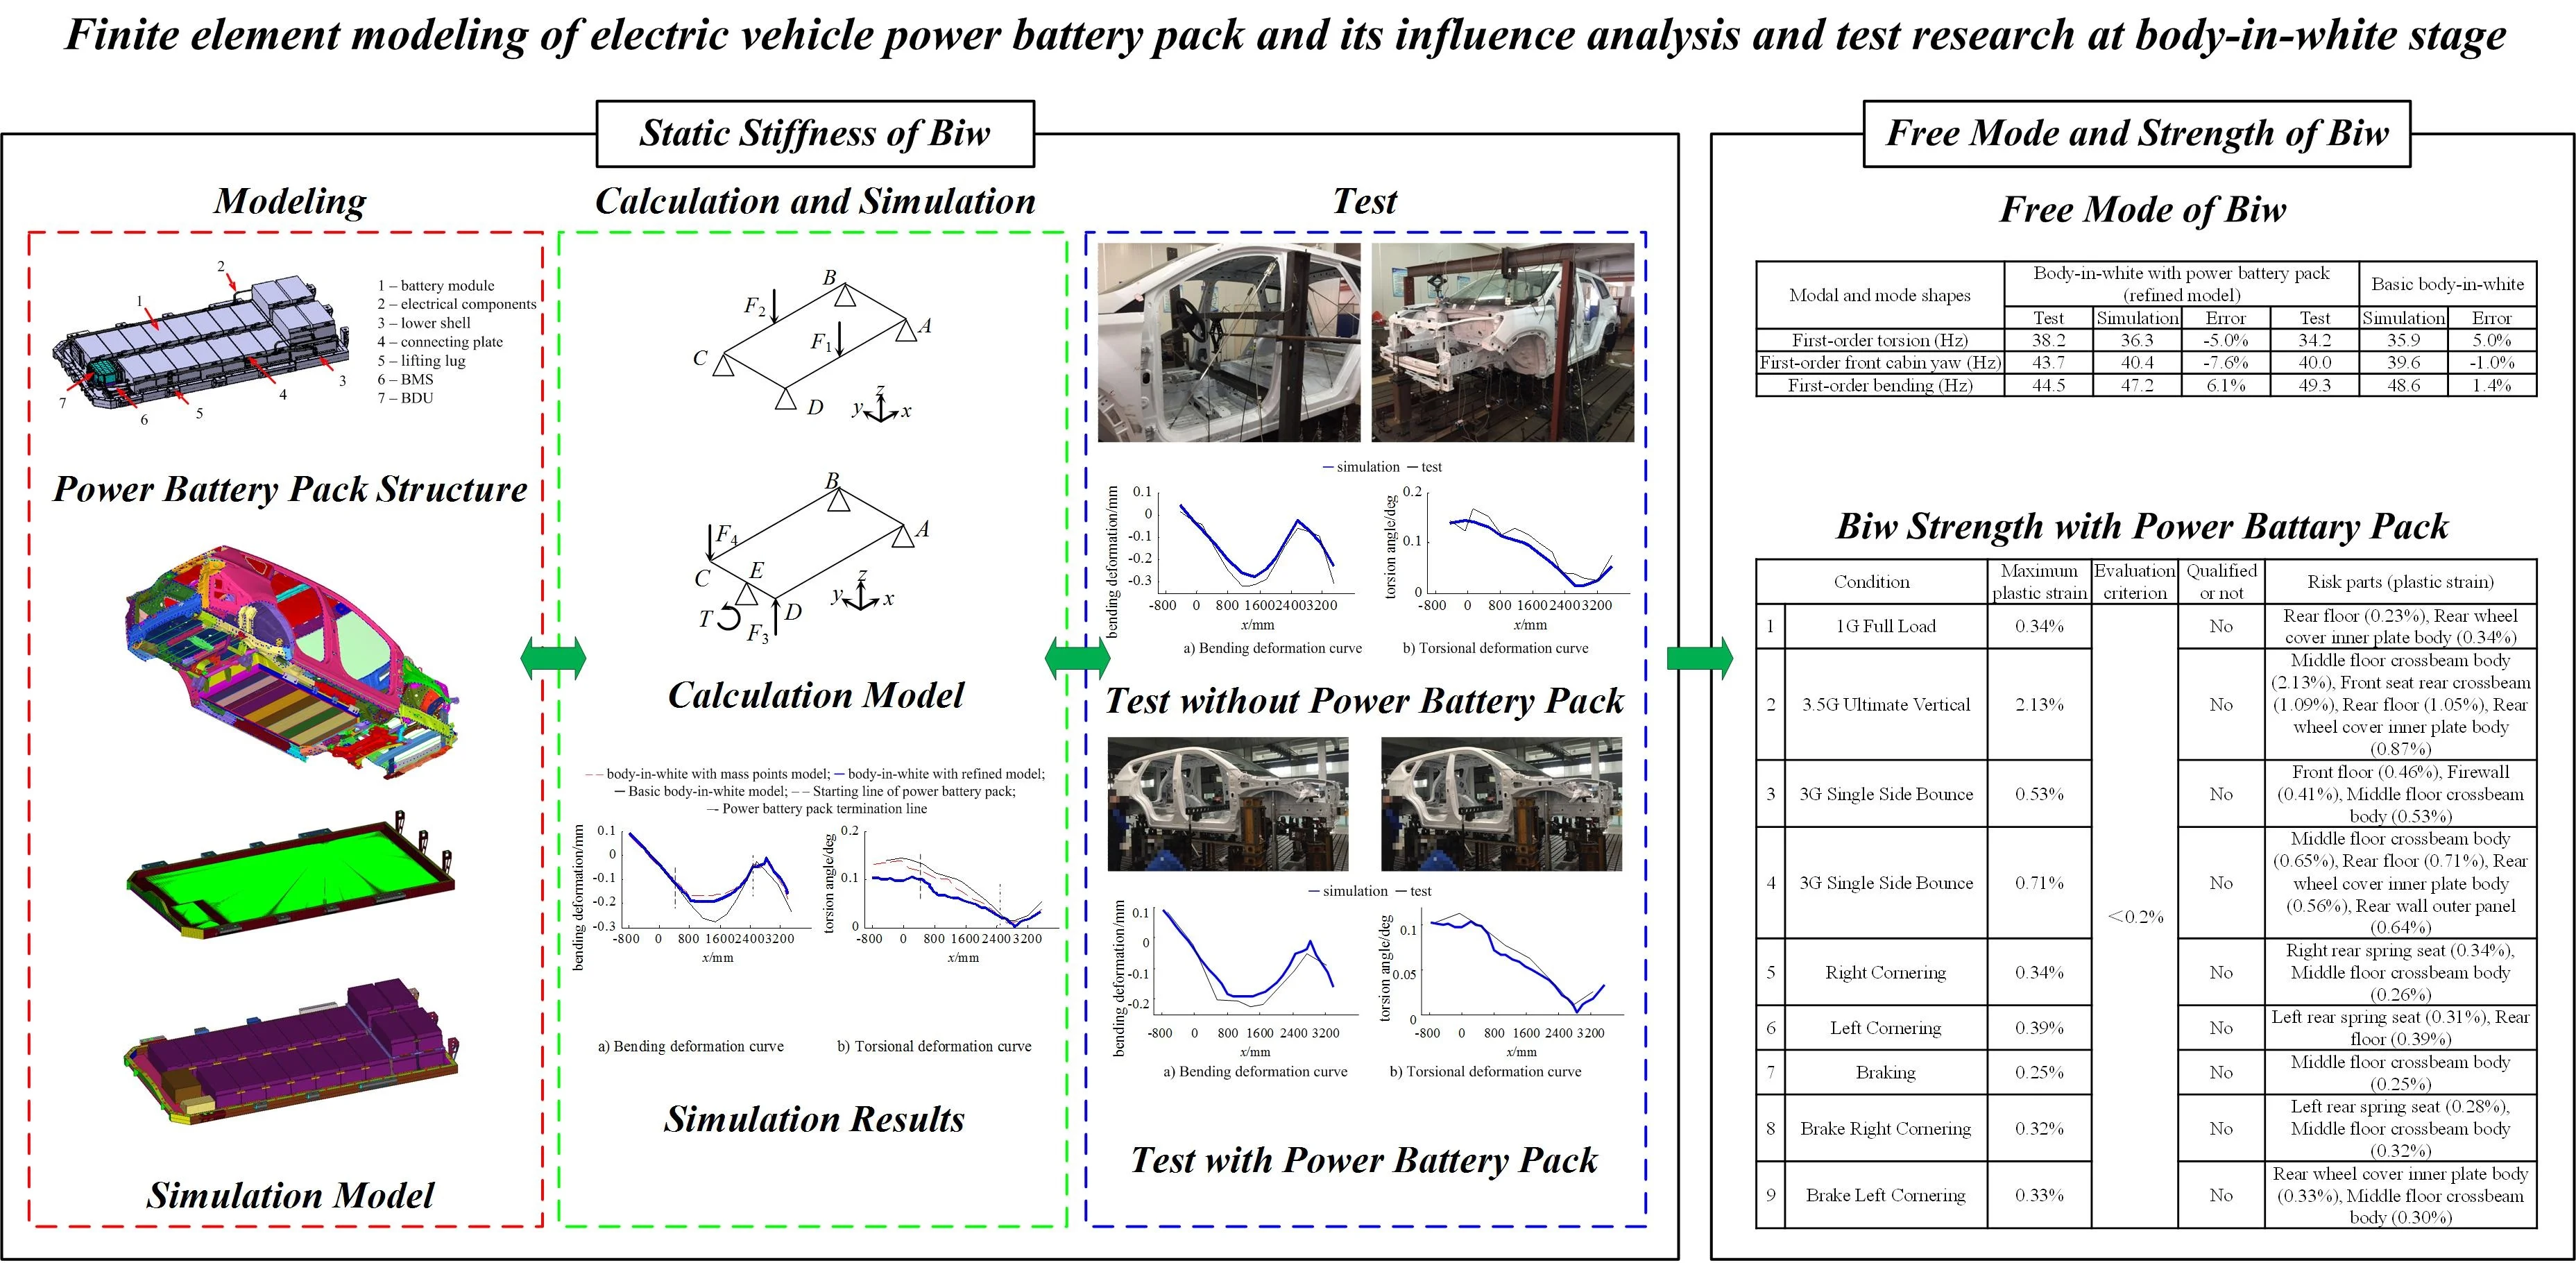 Finite element modeling of electric vehicle power battery pack and its influence analysis and test research at body-in-white stage